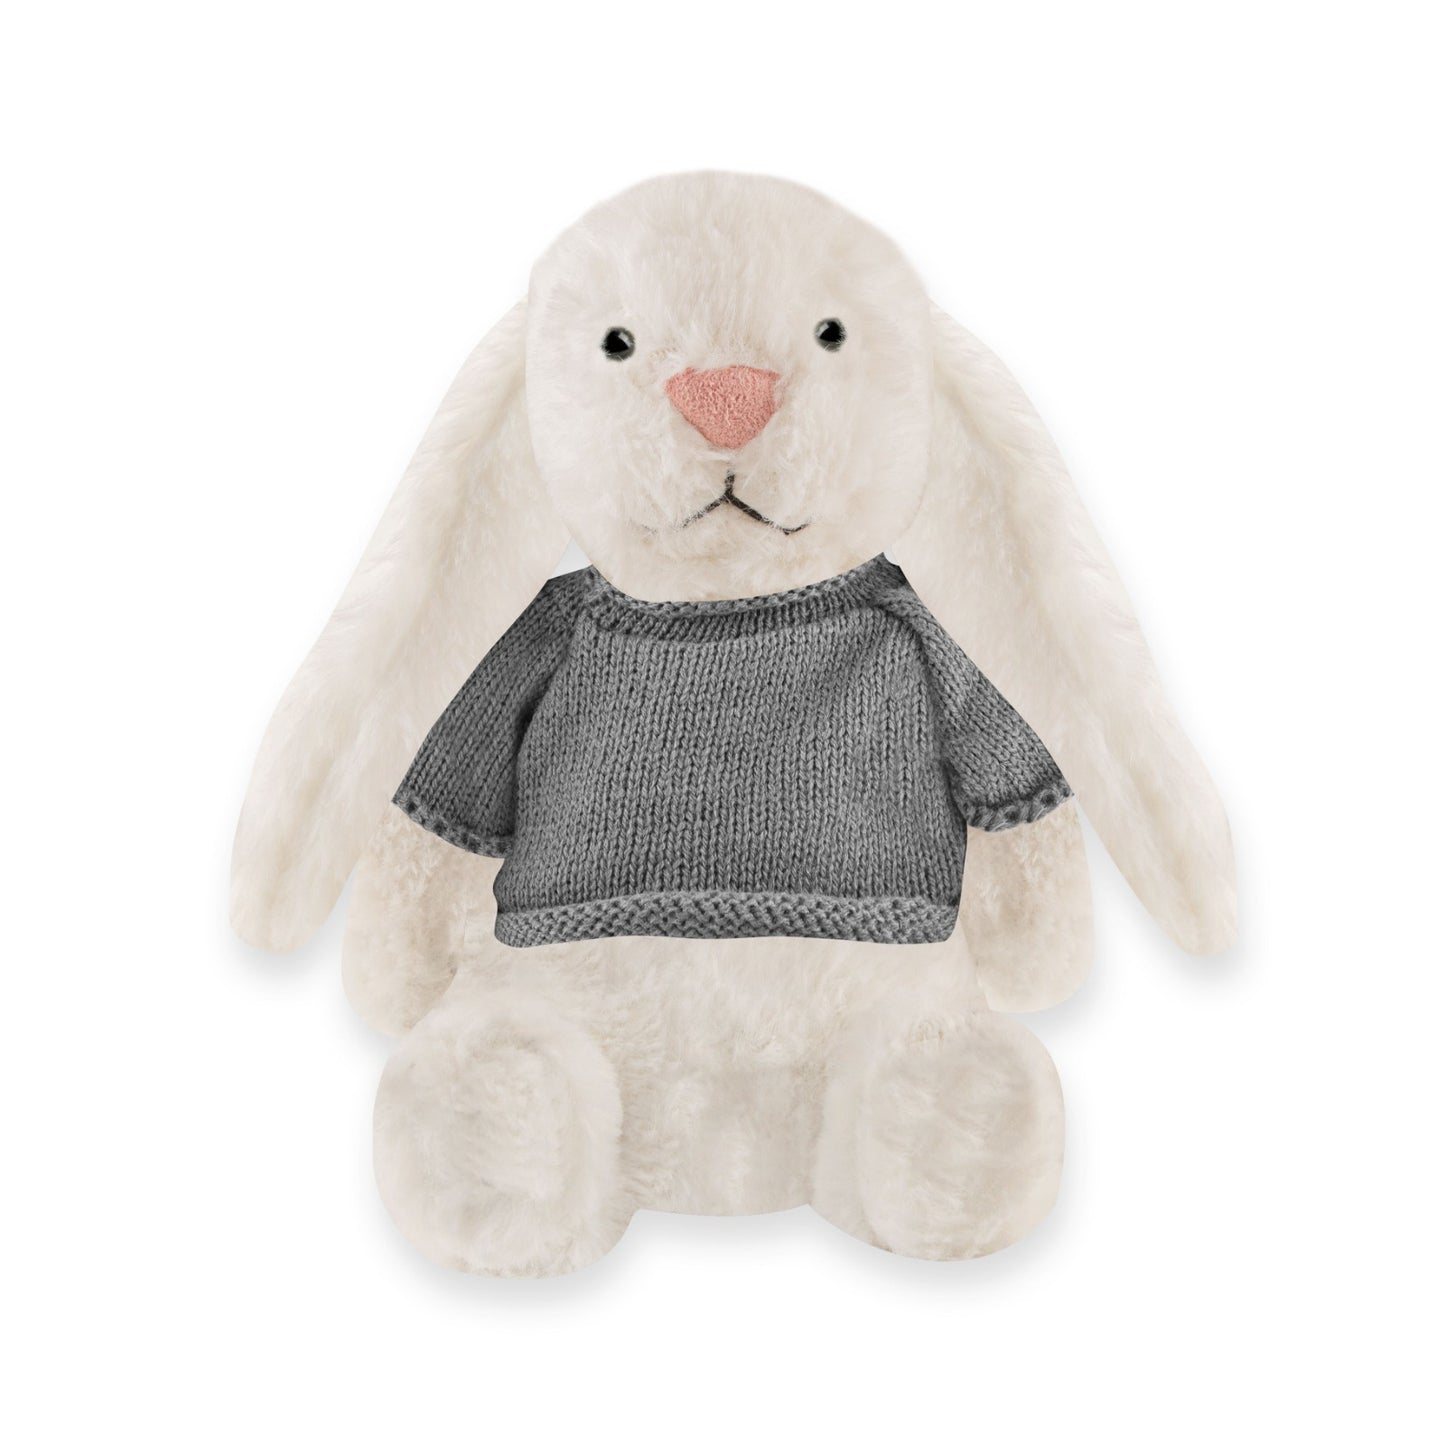 Bunny with Customized 定制兔仔公仔 (OH DONUT)